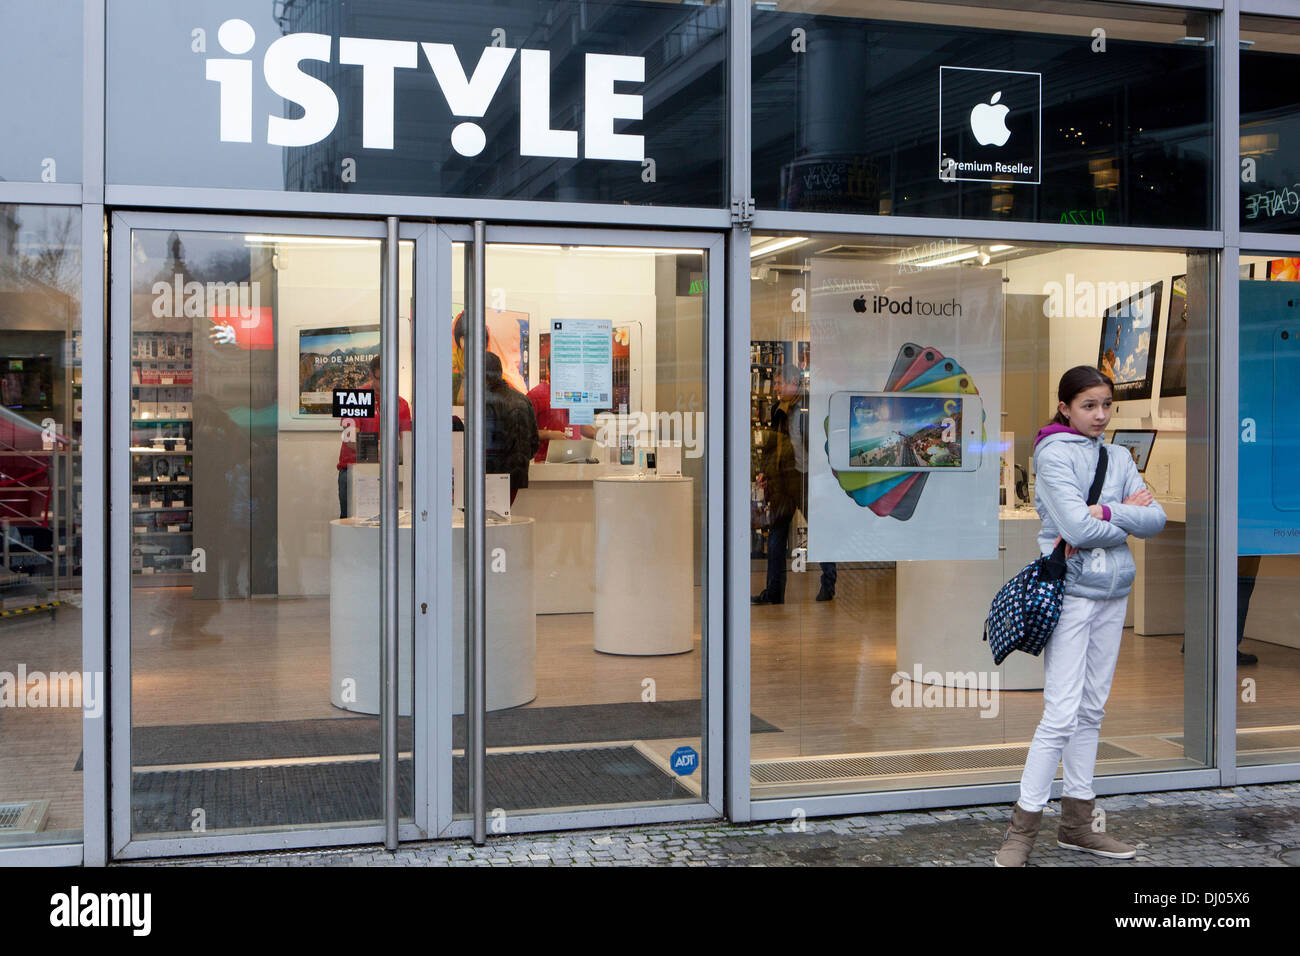 IStyle Apple Store, Foto Stock